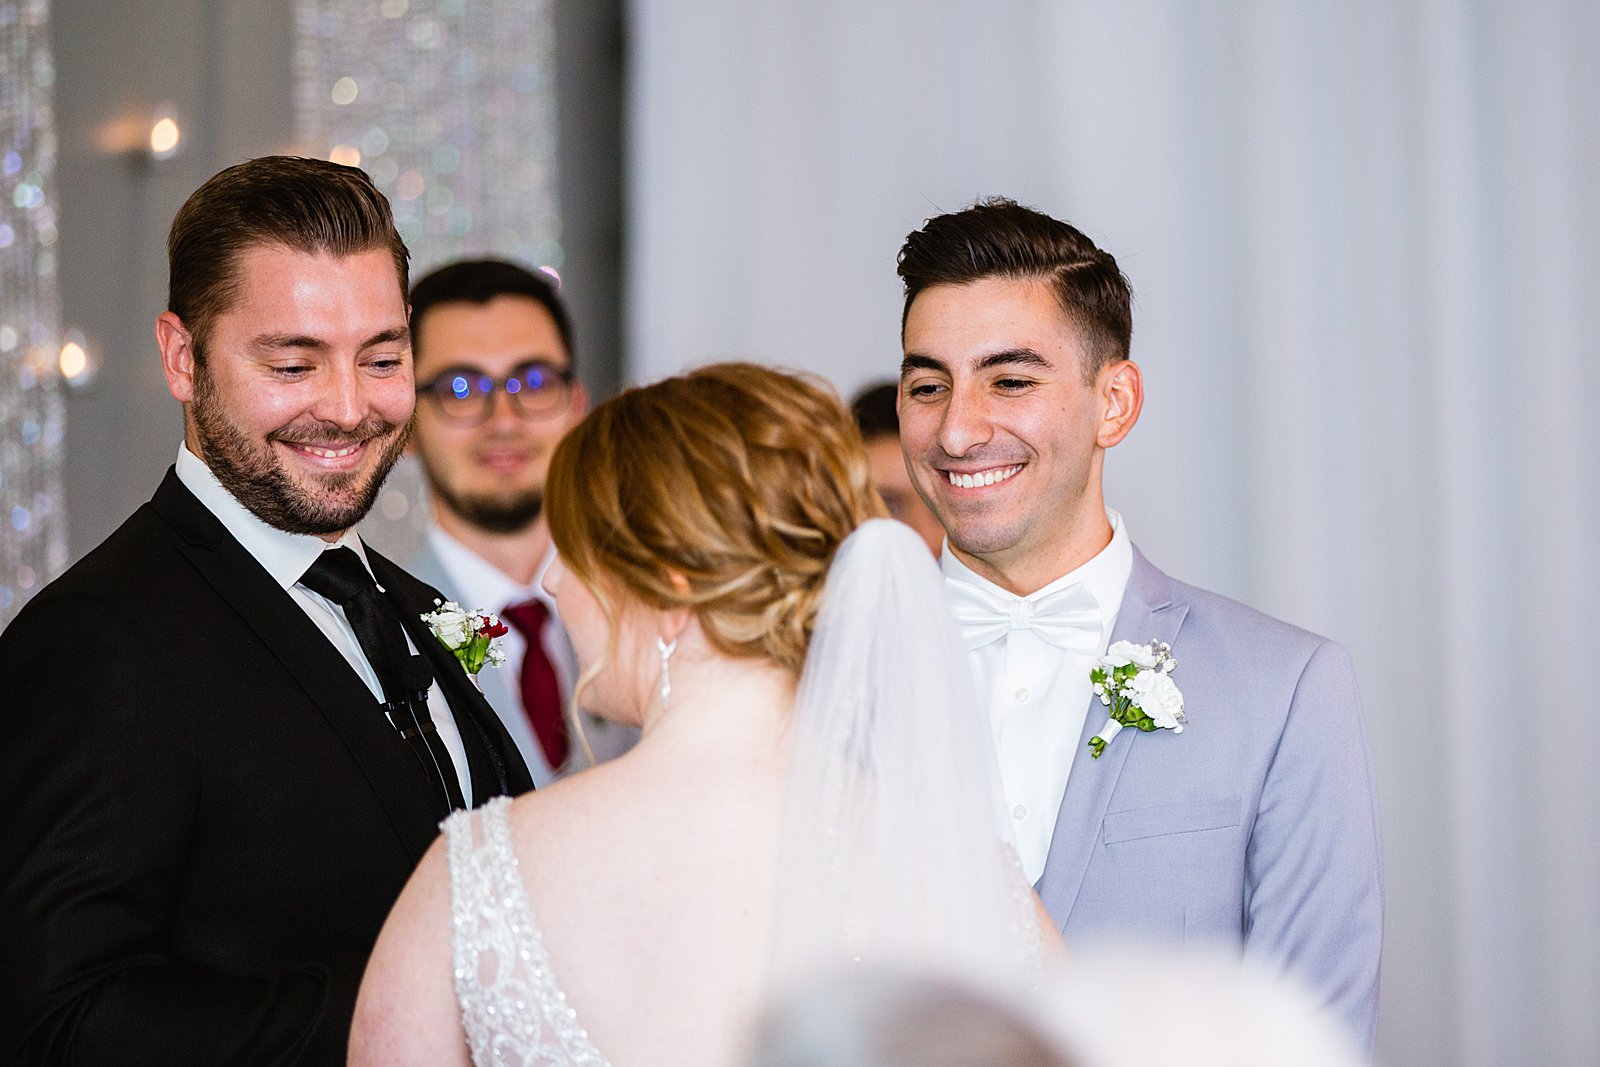 Groom looking at his bride during their wedding ceremony at SoHo63 by Chandler wedding photographer PMA Photography.